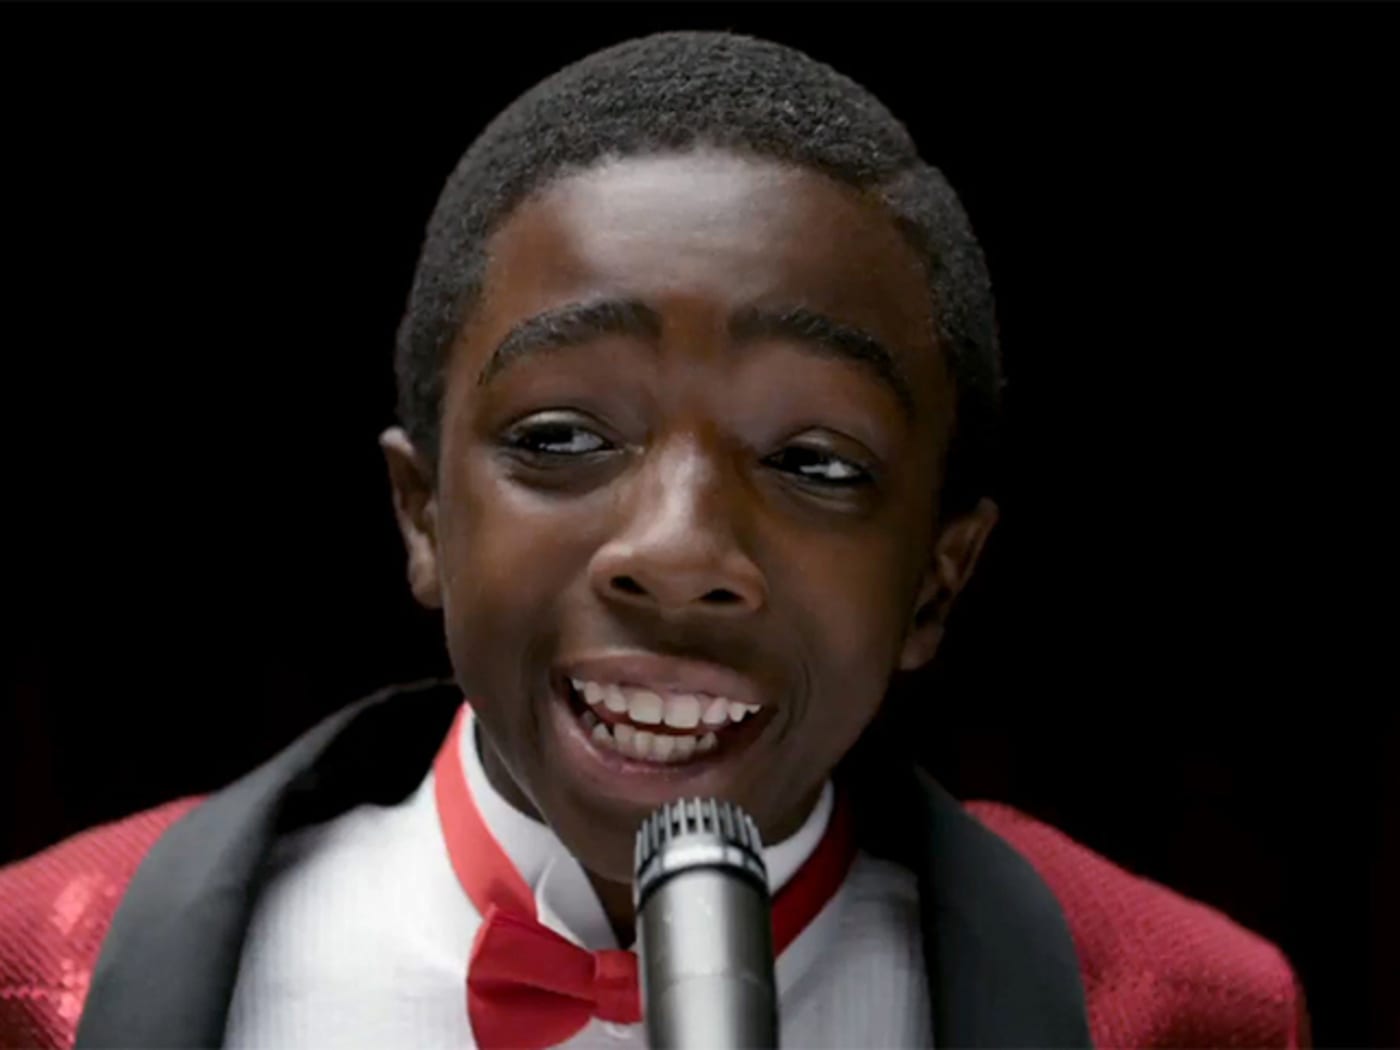 Caleb McLaughlin, 'The New Edition Story'